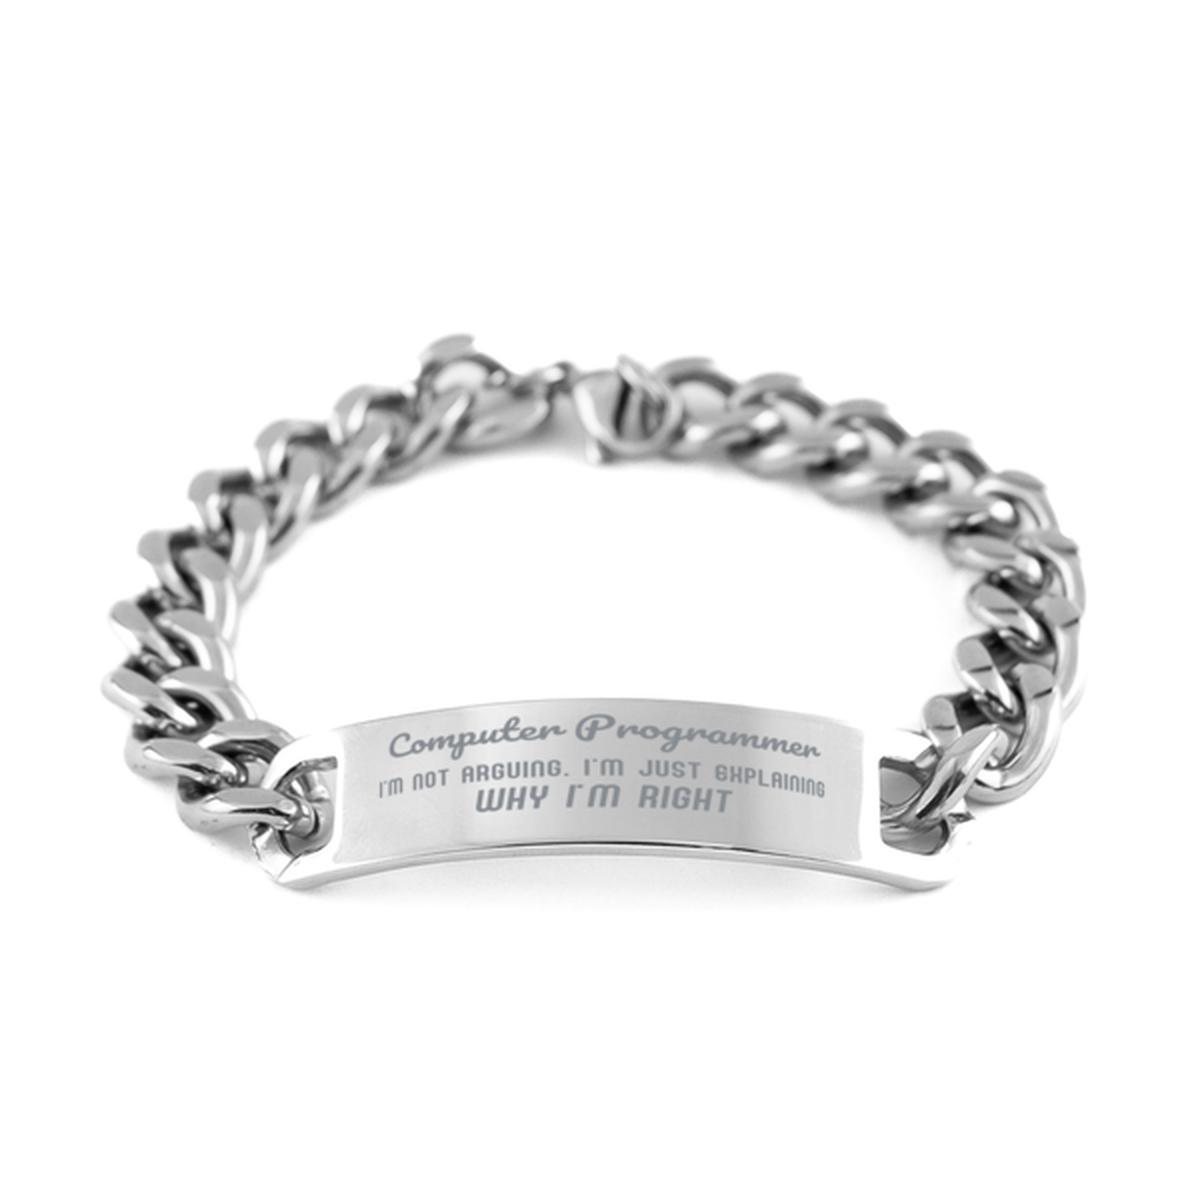 Computer Programmer I'm not Arguing. I'm Just Explaining Why I'm RIGHT Cuban Chain Stainless Steel Bracelet, Graduation Birthday Christmas Computer Programmer Gifts For Computer Programmer Funny Saying Quote Present for Men Women Coworker